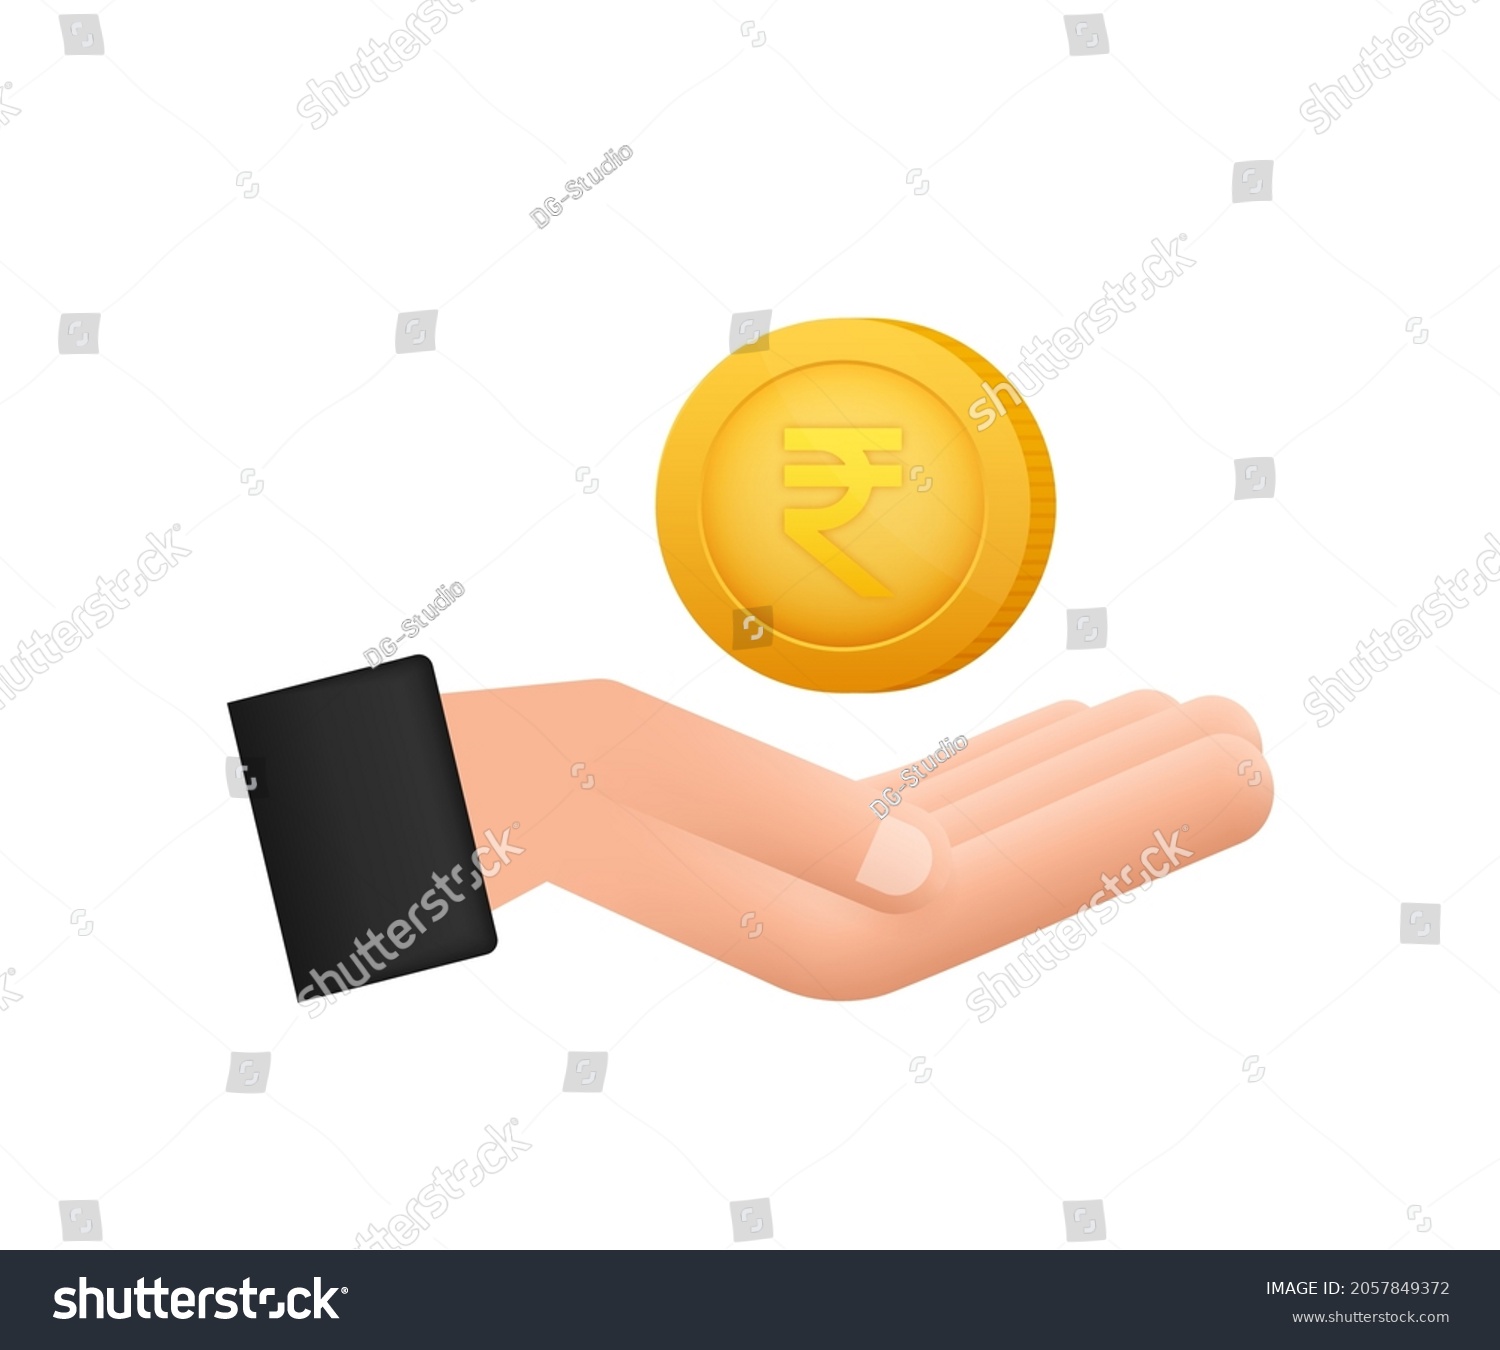 SVG of Rupee coin on hand, great design for any purposes. Flat style vector illustration. Currency icon. svg